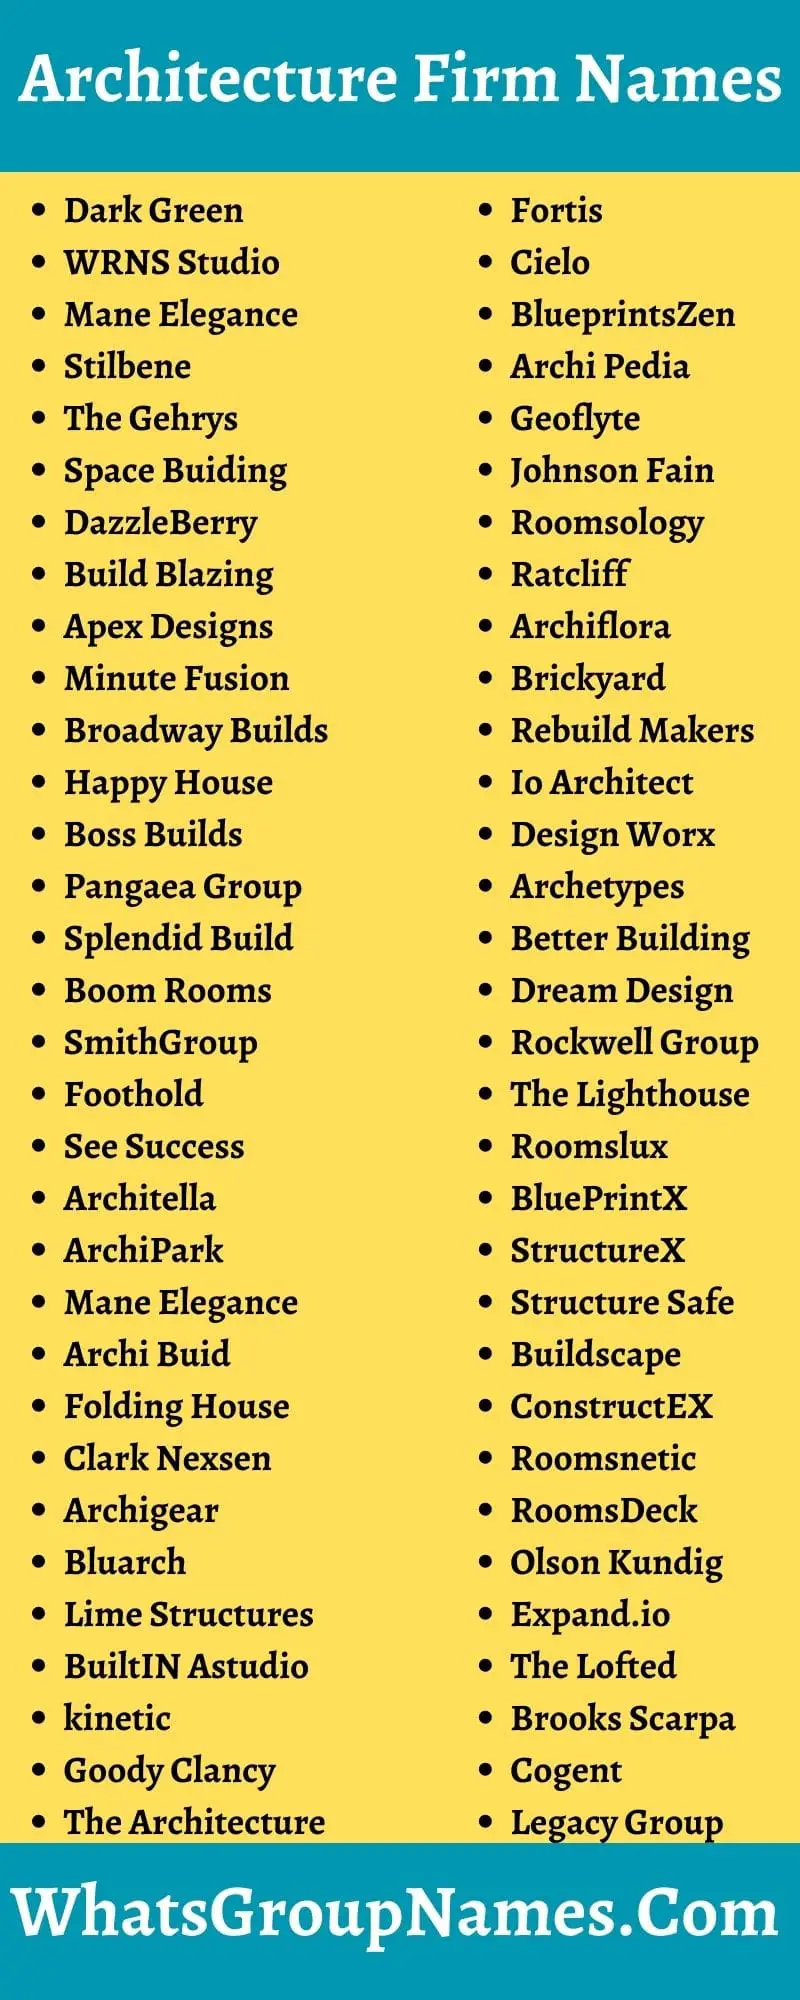 Architecture Firm Names